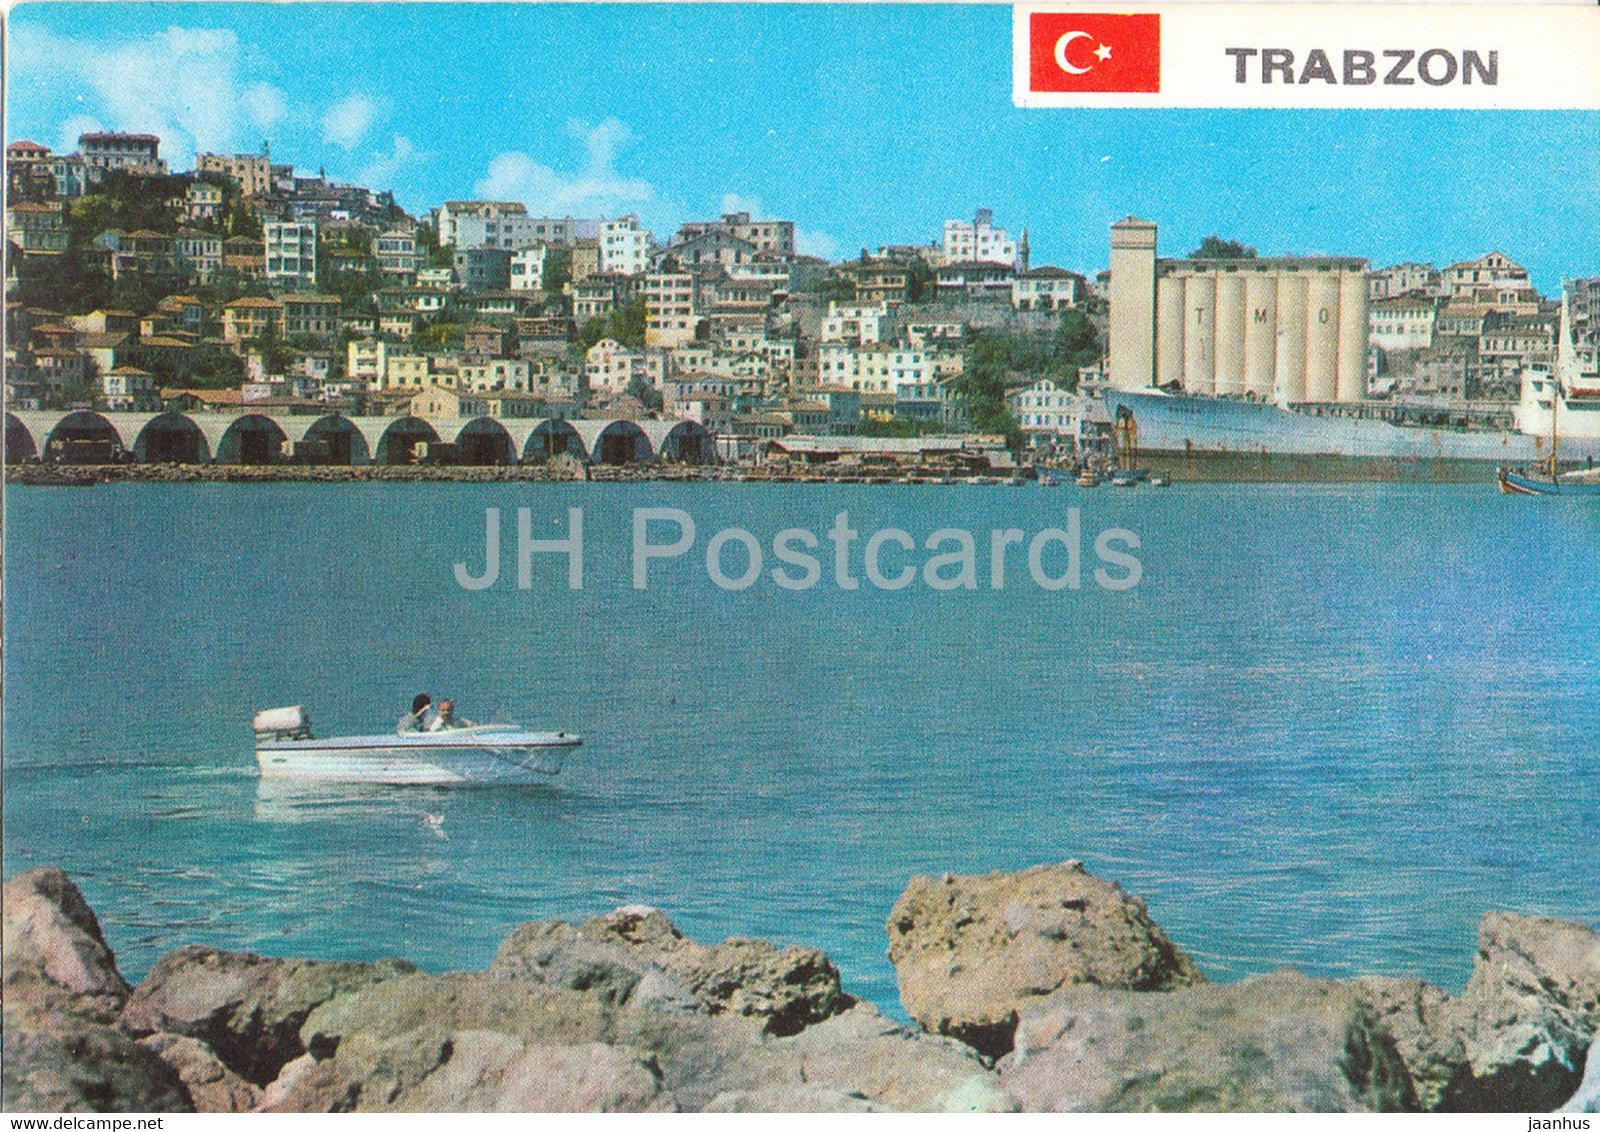 Trabzon - A view of the city and the port from the breakwater - 1987 - Turkey - used - JH Postcards